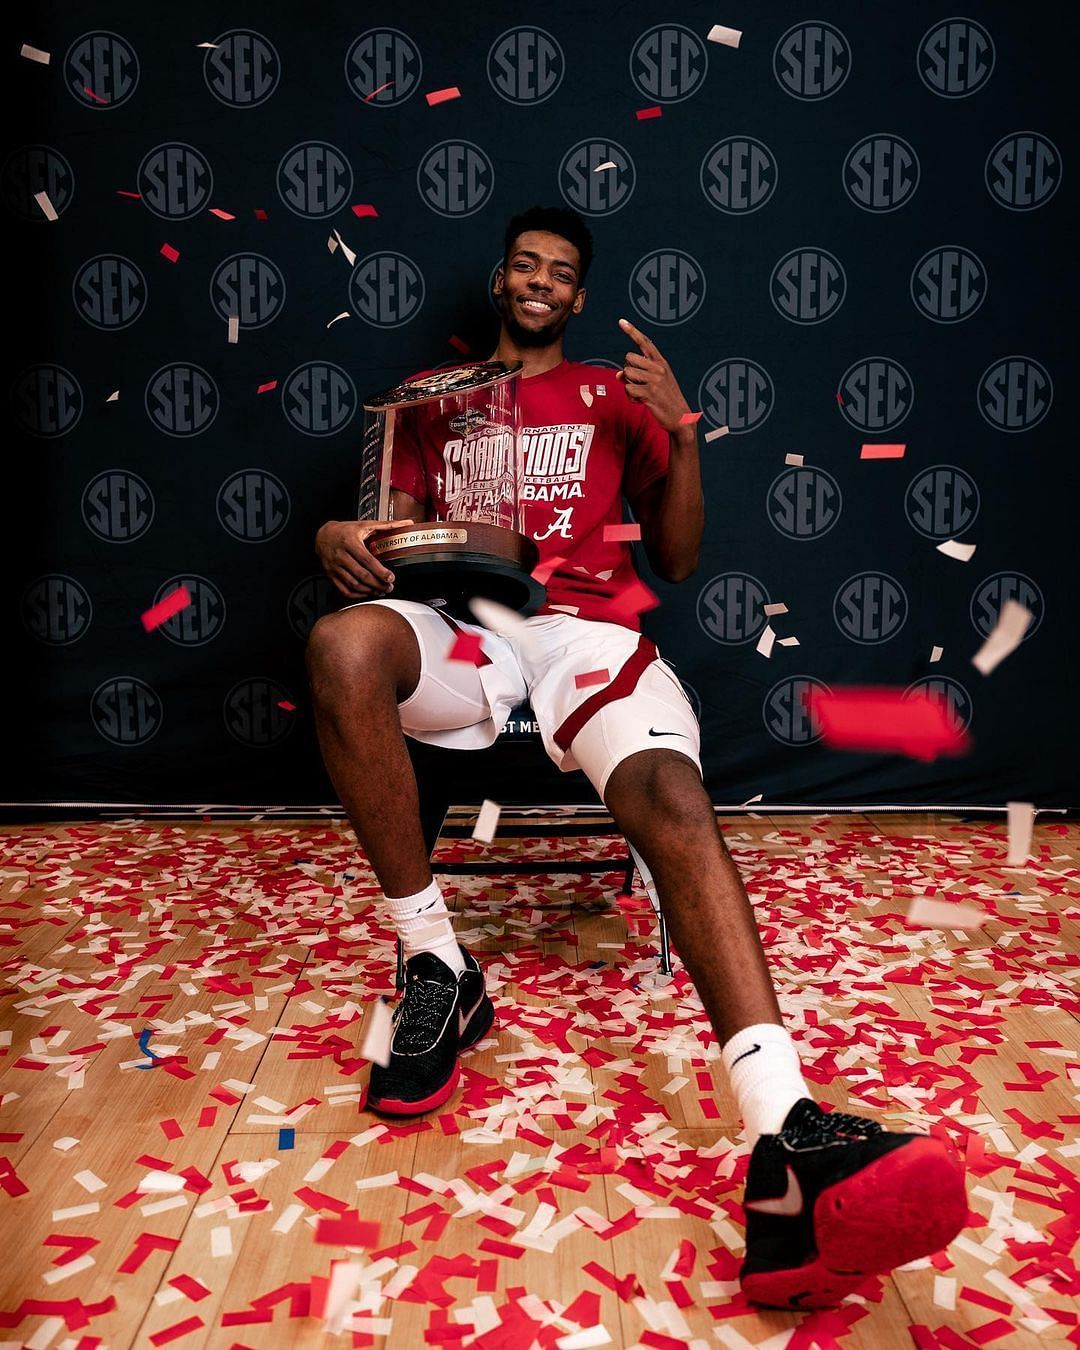 Brandon with the SEC 2023 Trophy (Image courtesy of Brandon Miller&rsquo;s Instagram)